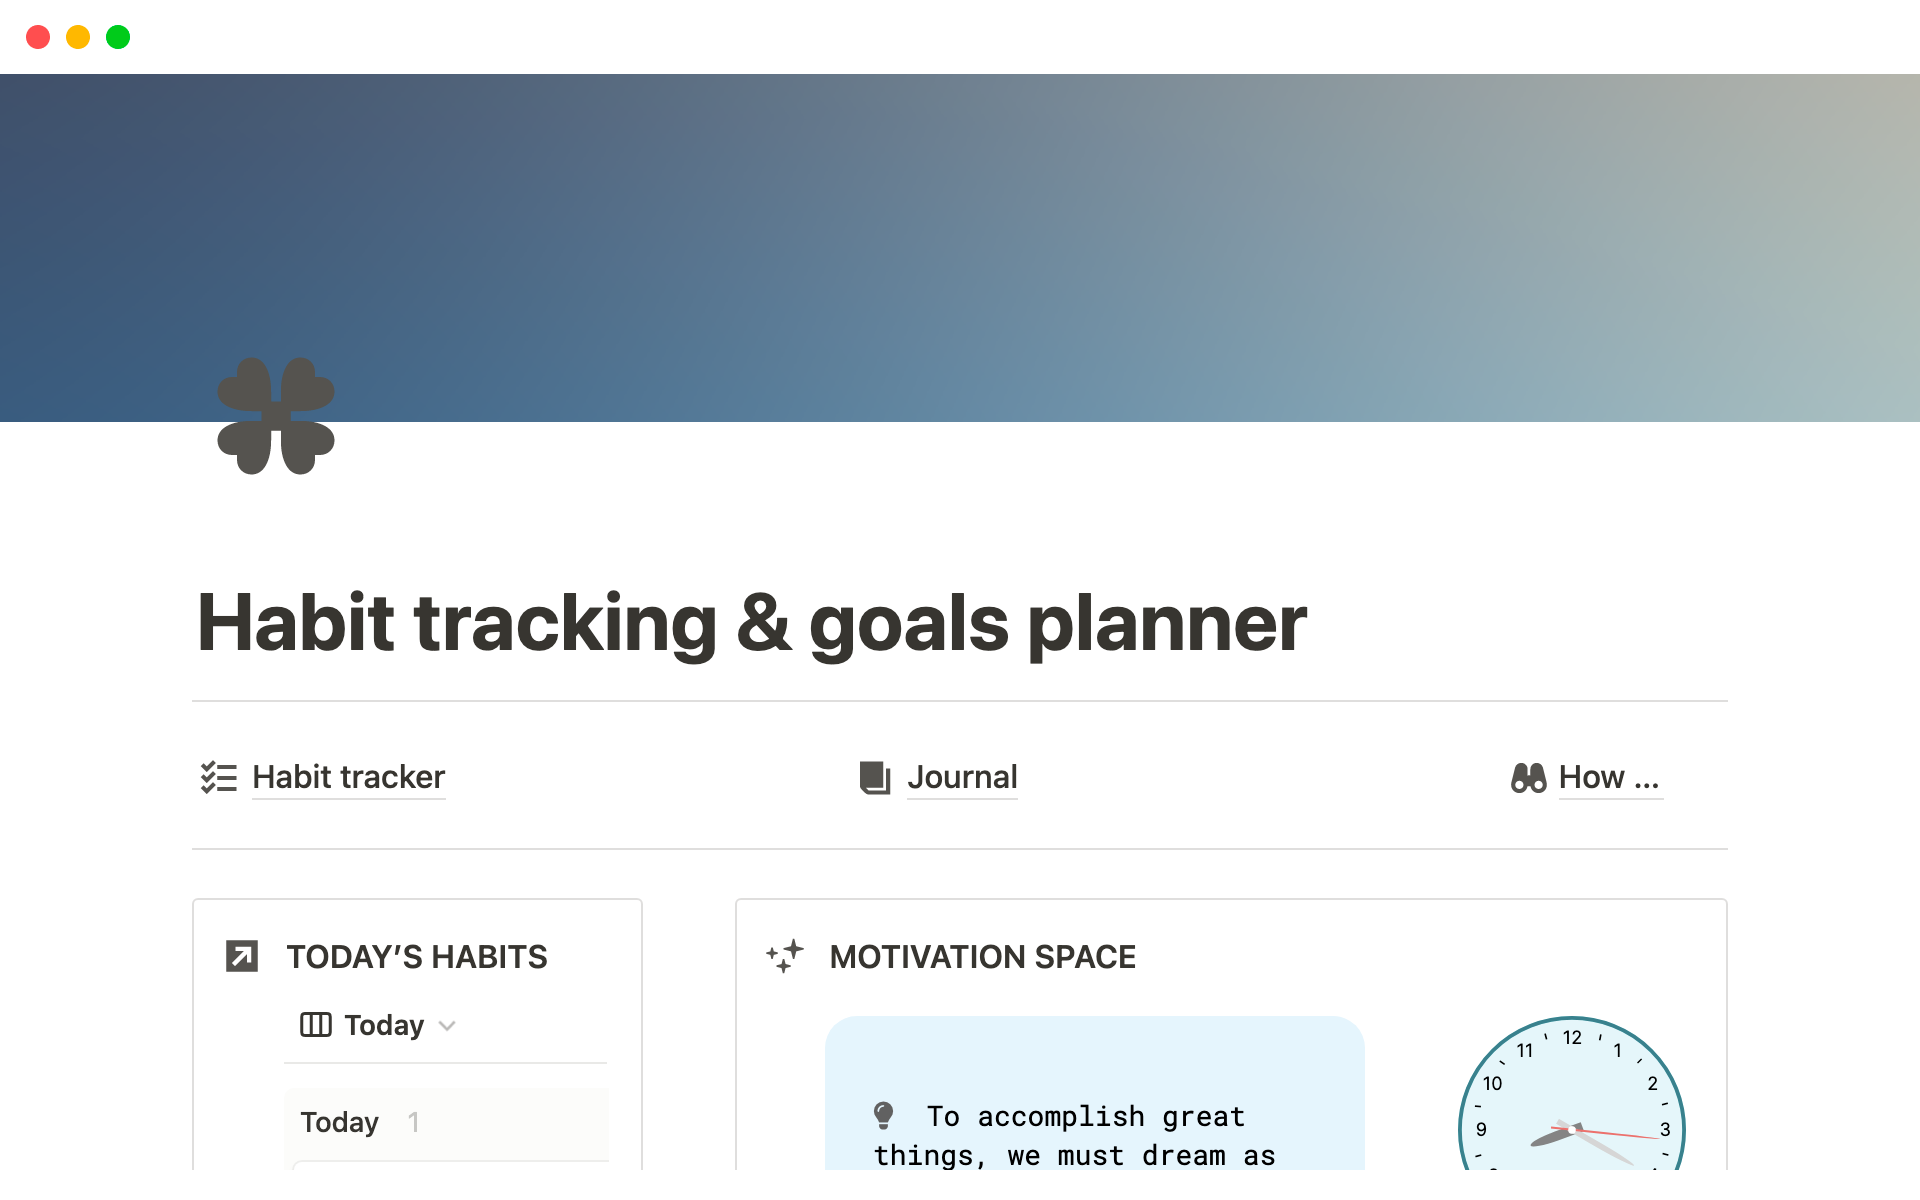 This template lets you stay focused on building new habits and reinforcing previous ones. It also lets you set goals and make detailed tasks to complete them easier.